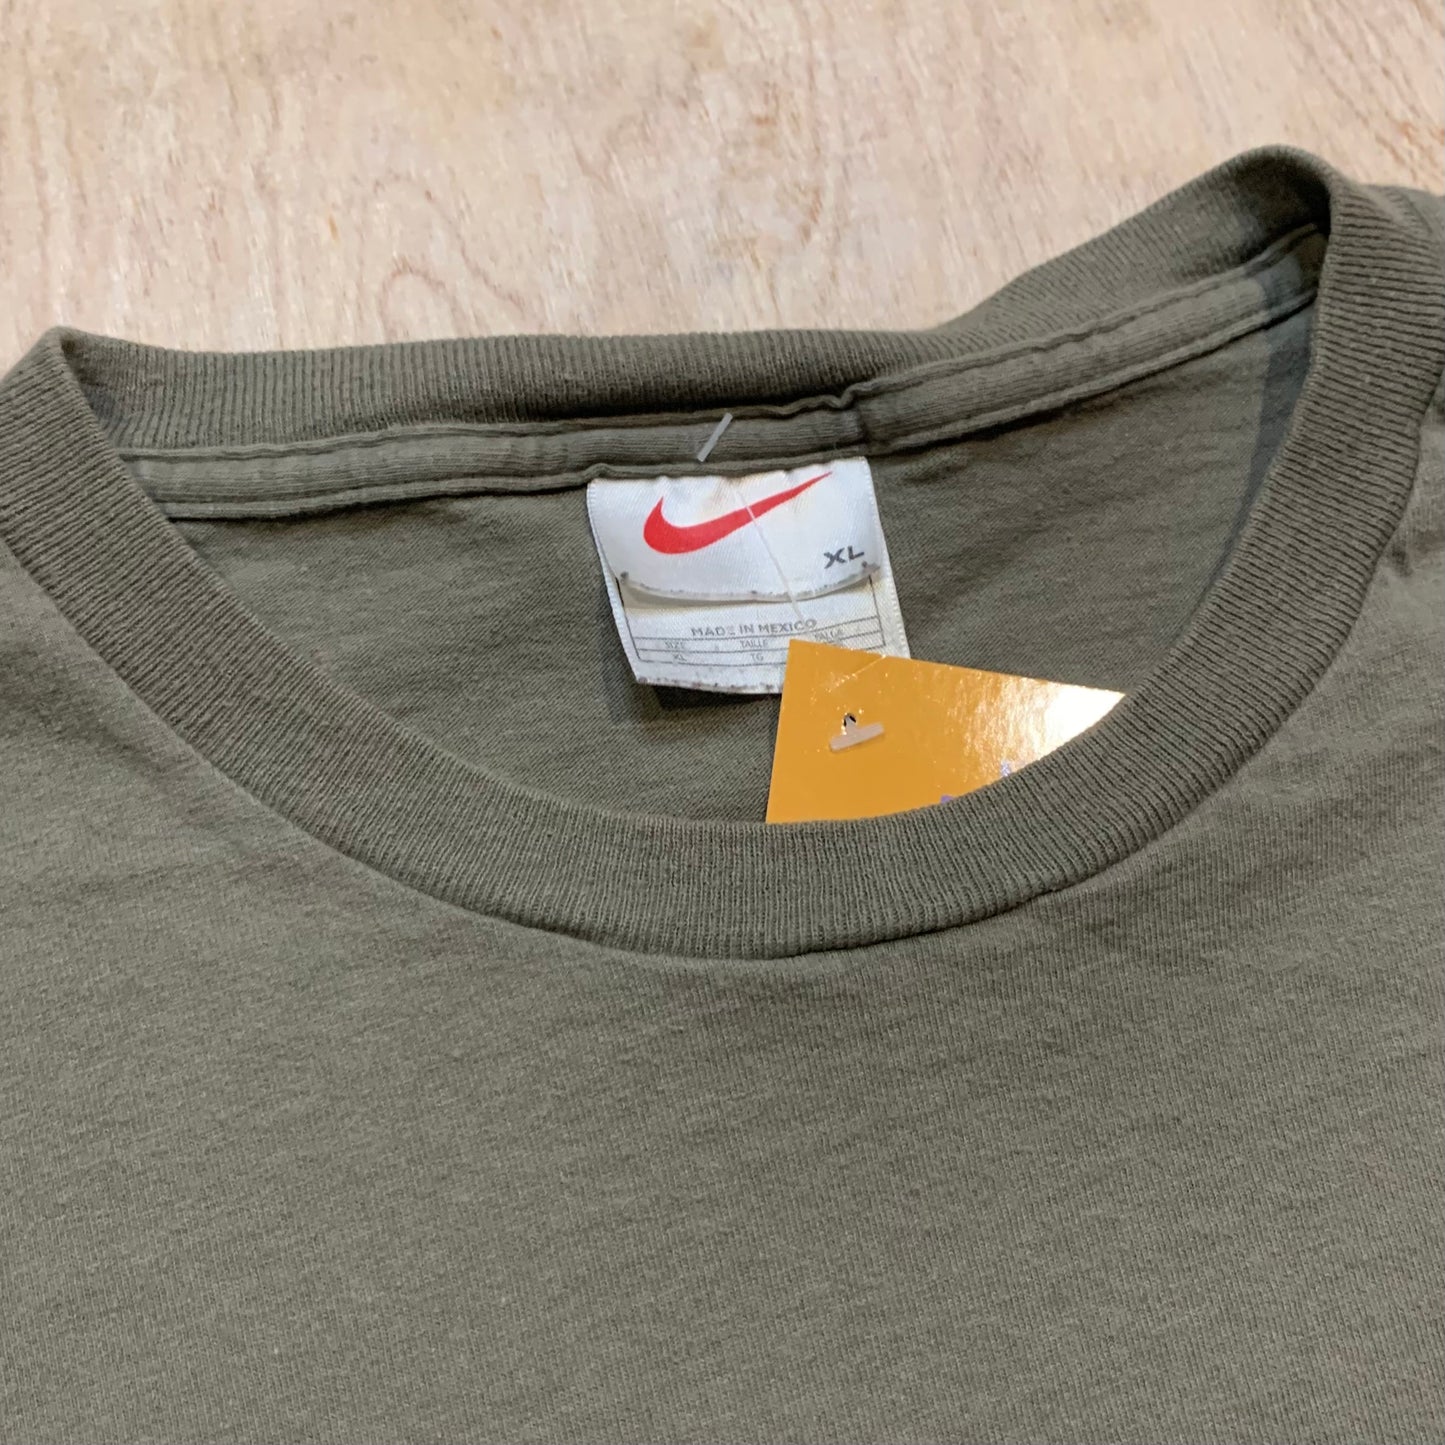 Vintage Nike Silver Tag Olive Green T-Shirt